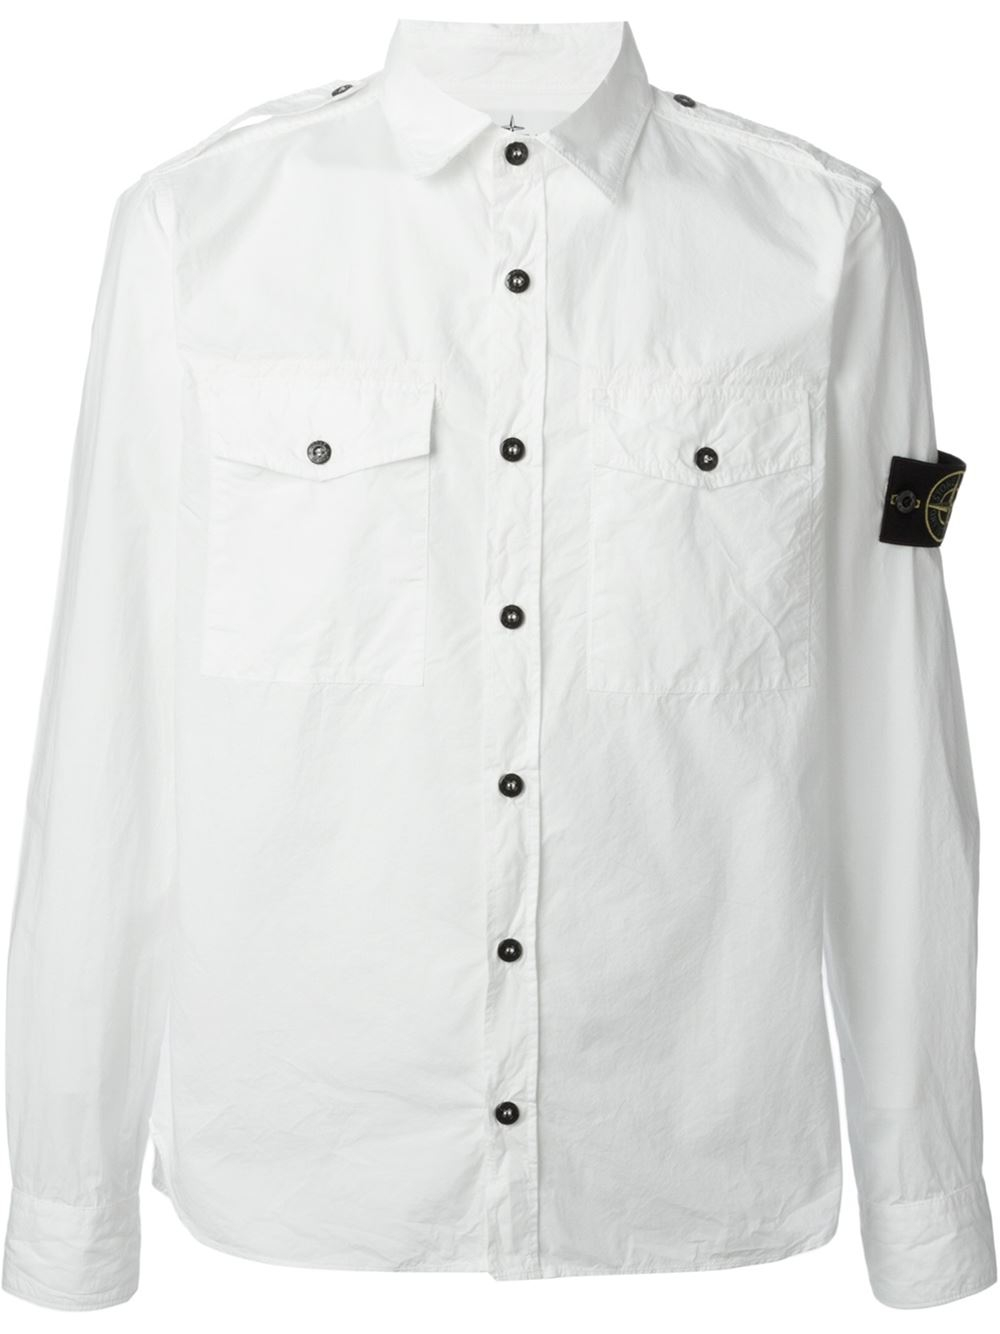 Stone Island Sleeve Patch Shirt in White for Men - Lyst